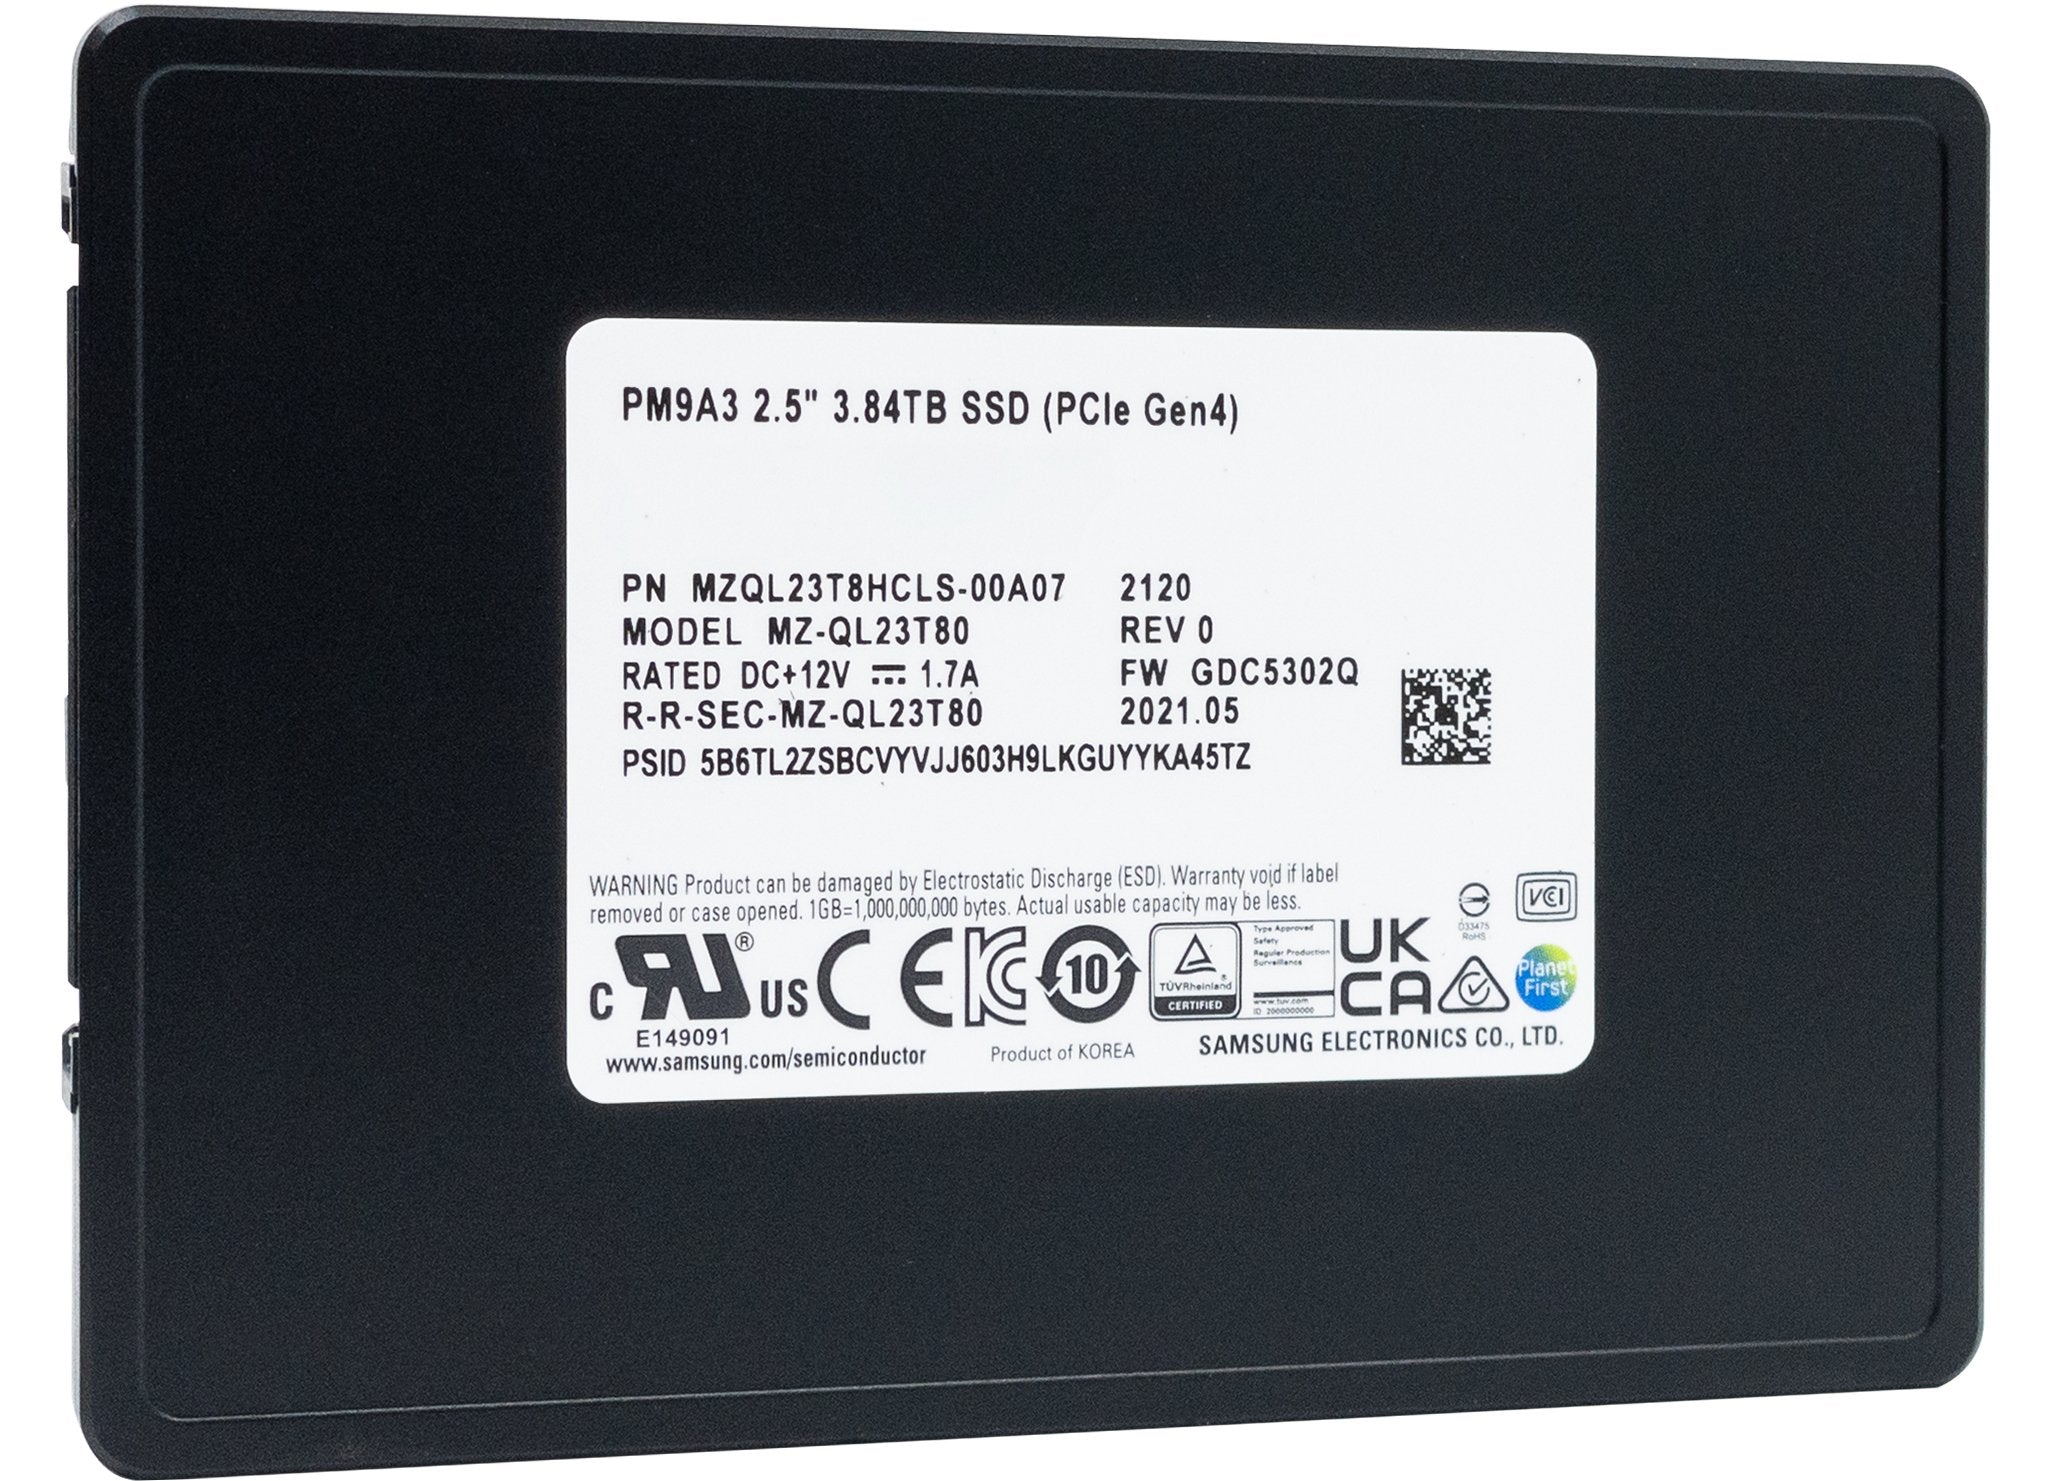 Samsung PM9A3 MZ-QL23T80 MZQL23T8HCLS-00A07 3.84TB PCIe Gen 4.0 x4 8GB/s Read Intensive 2.5in Refurbished SSD